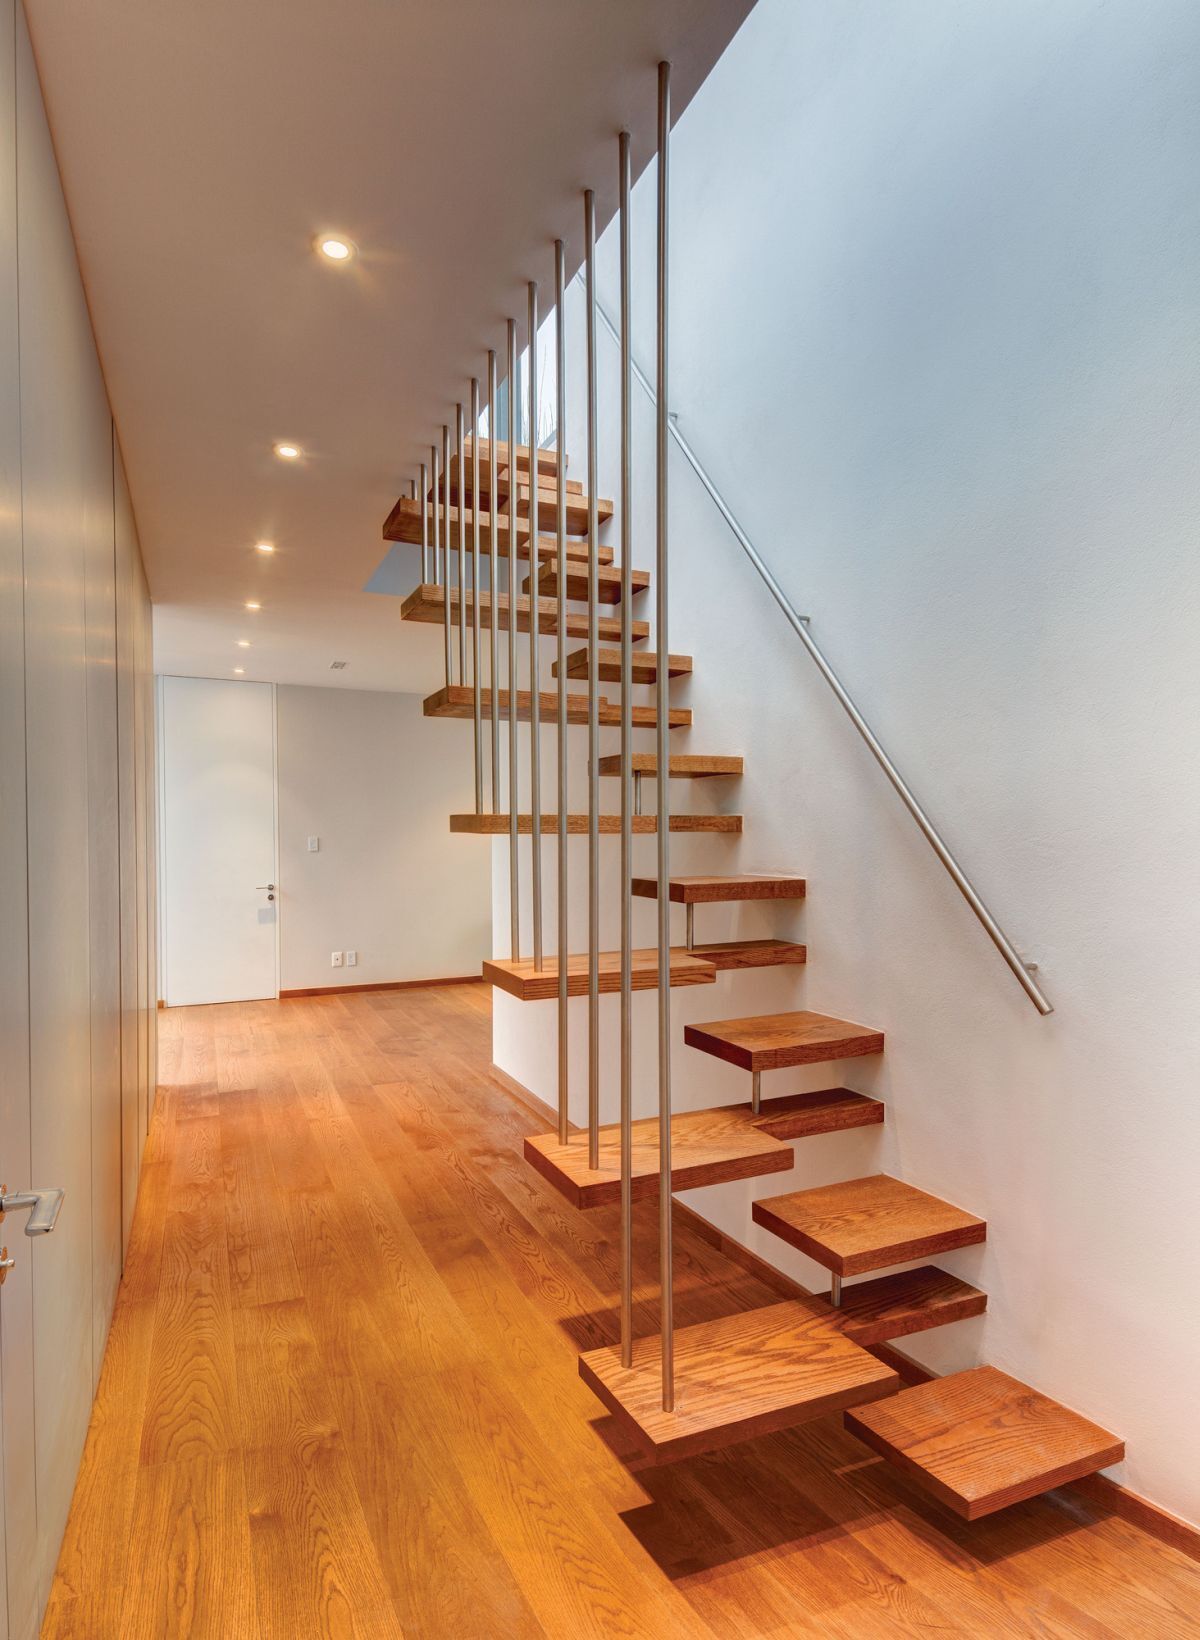 How To Increase Individual Stair Step Depth For The Entire Stairway - Home  Remodeling Tips 